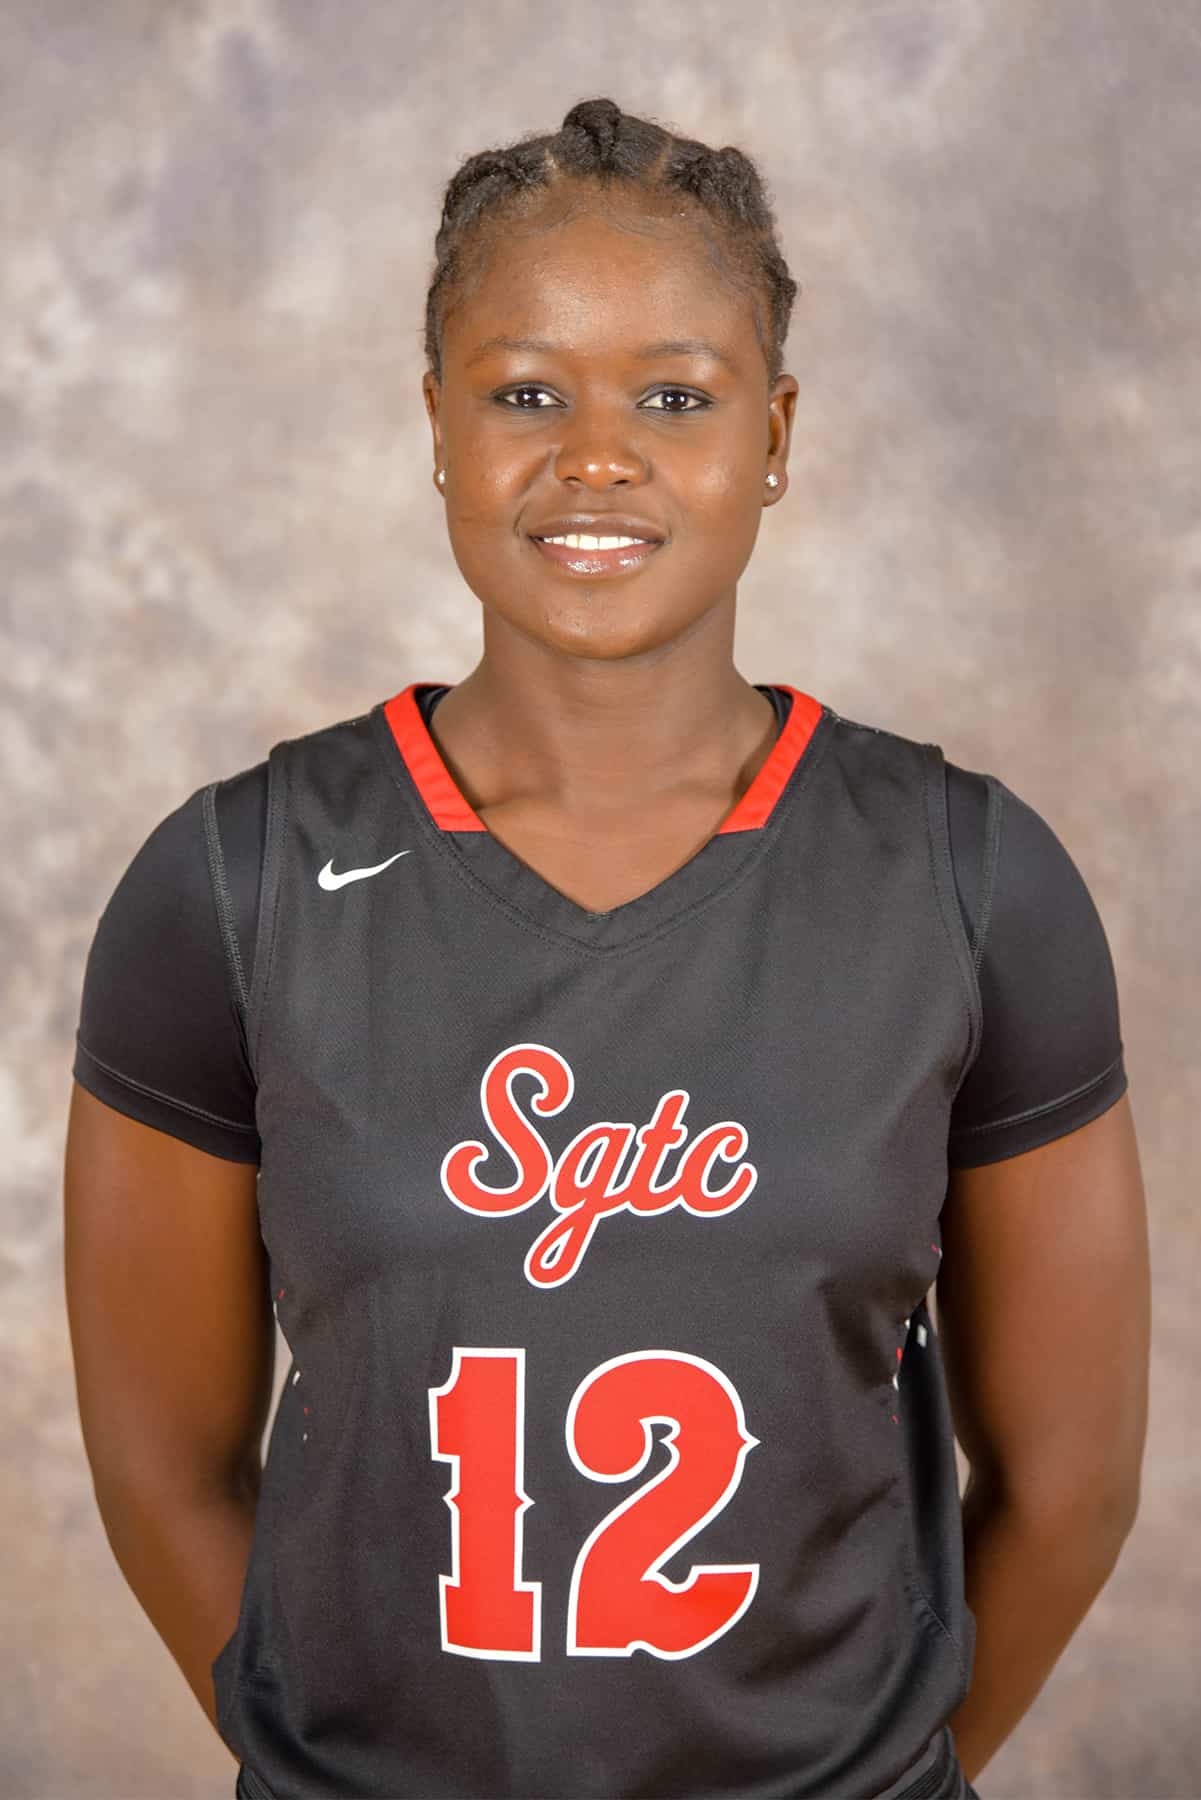 Fatou Pouye, 12, named GCAA Division I Women’s Basketball Player of the Week.